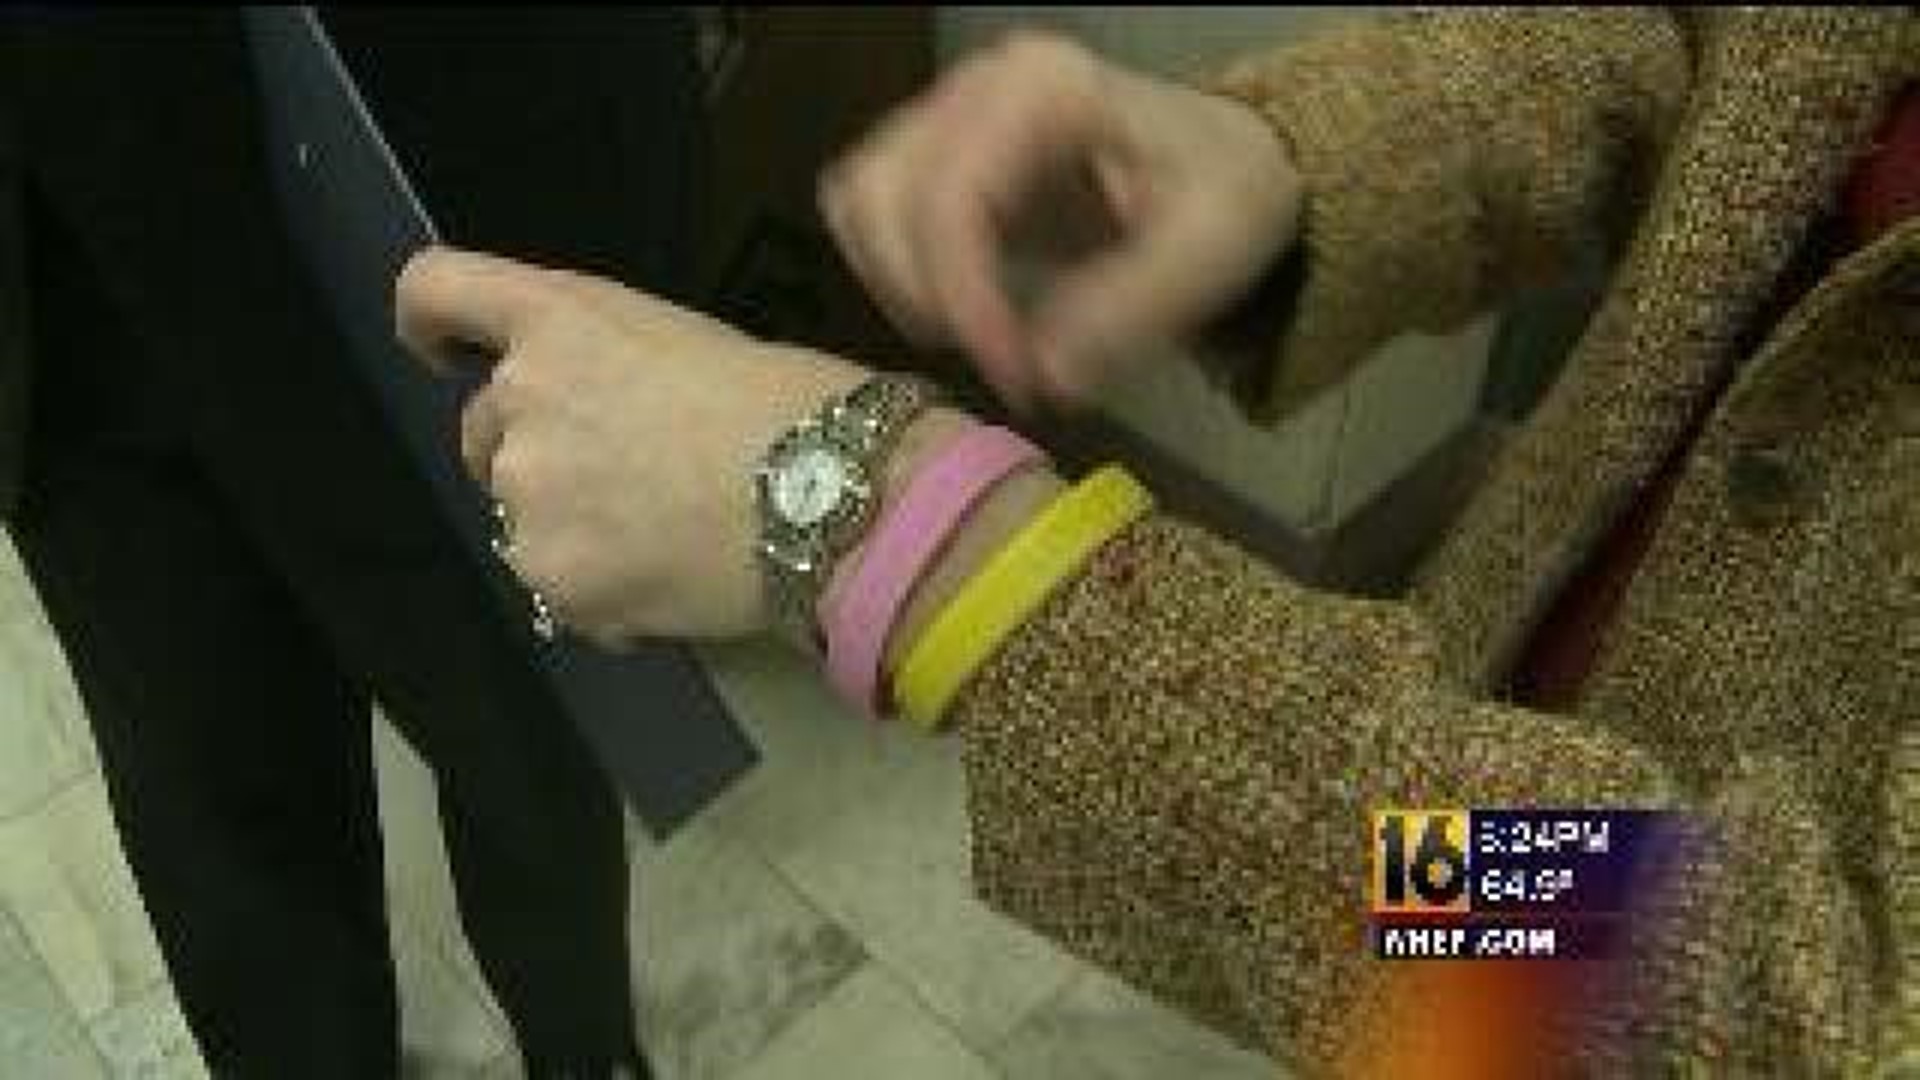 Cancer Awareness Week in Schuylkill County